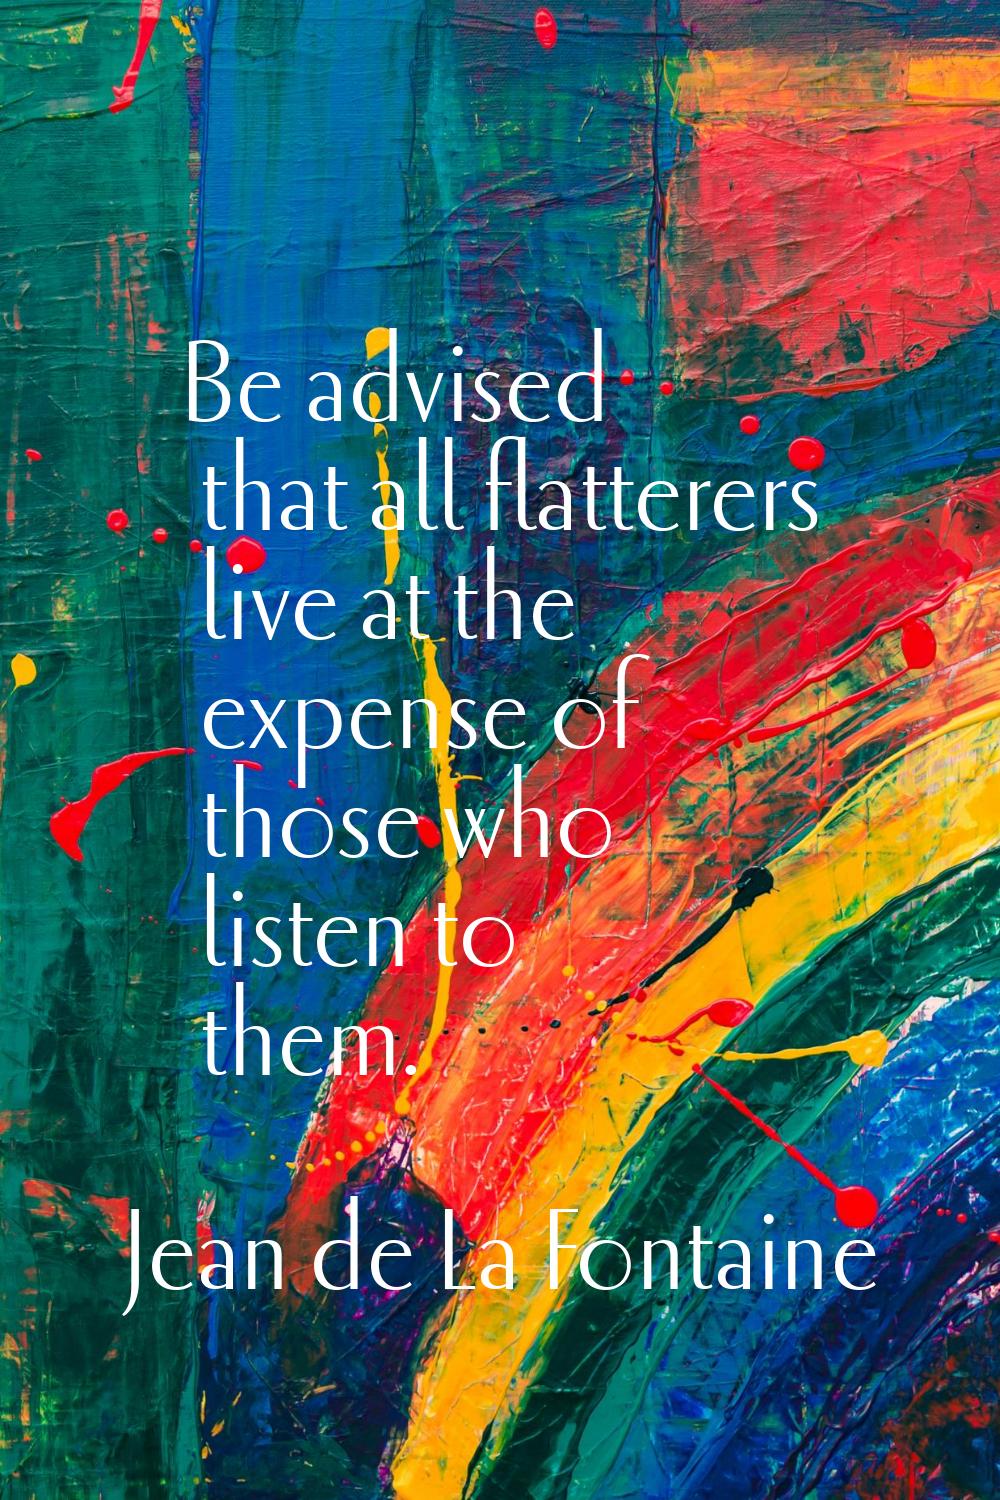 Be advised that all flatterers live at the expense of those who listen to them.